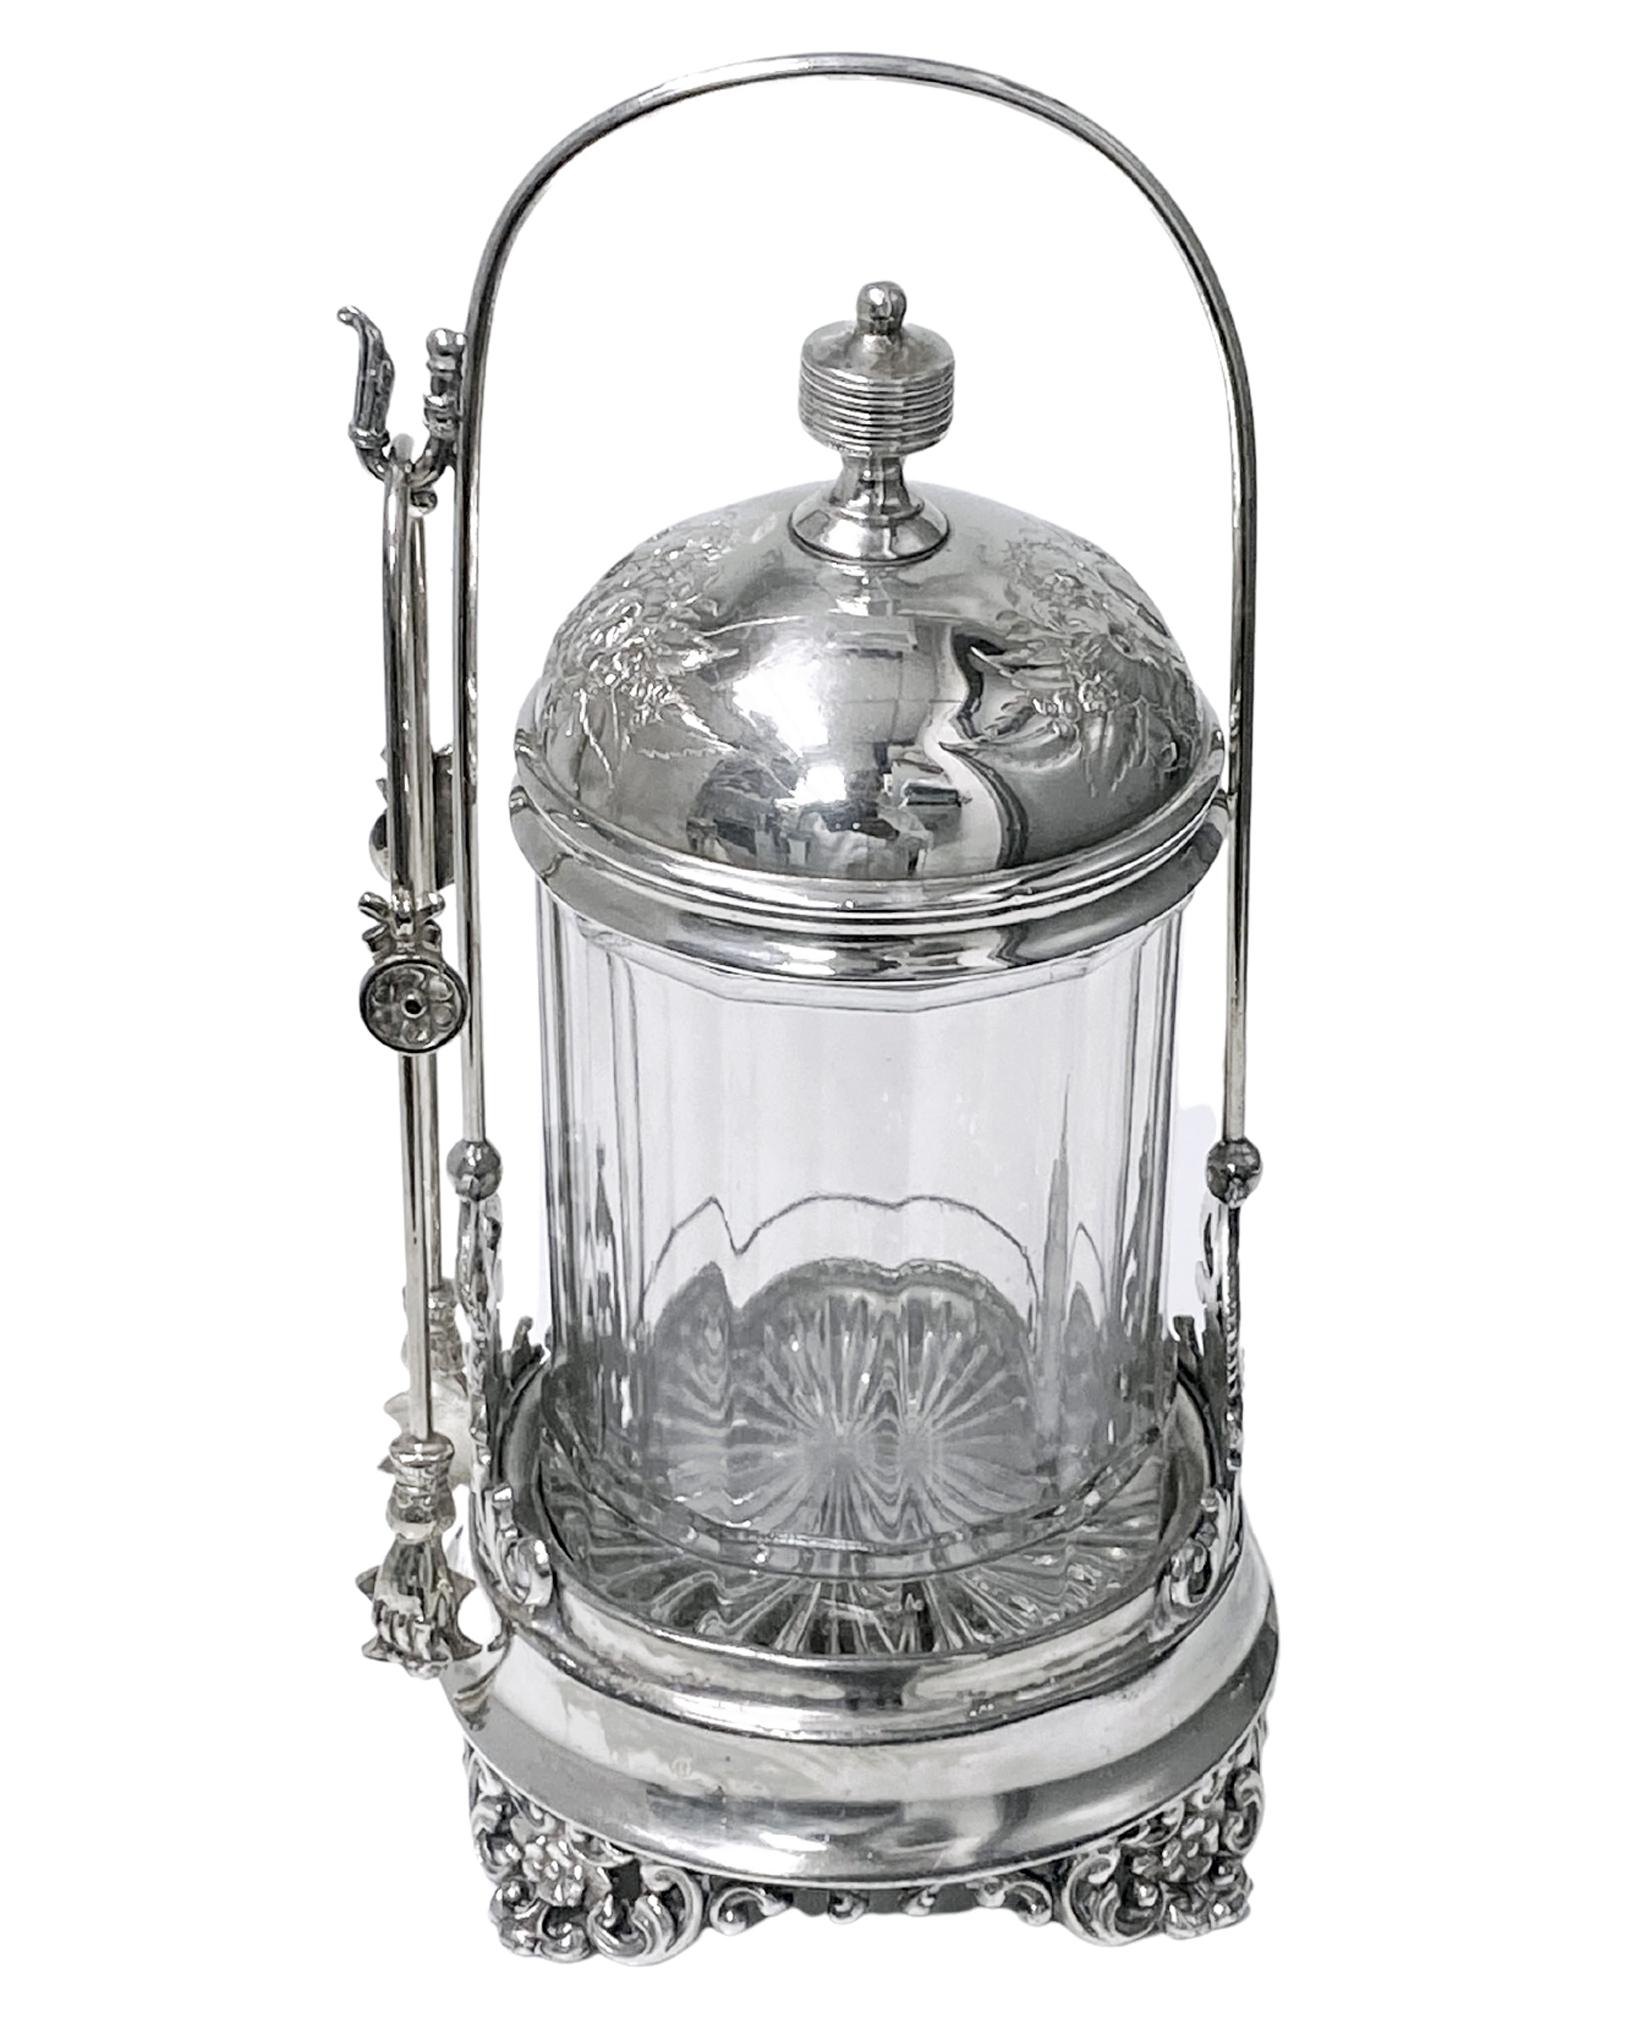 Antique Colonial Quadruple Silver plate Pickle Castor with Tongs, C.1890. Good condition, paneled glass container, footed frame base with pierced scroll foliage supports conforming in design to frame of glass lid with ribbed finial Signed on